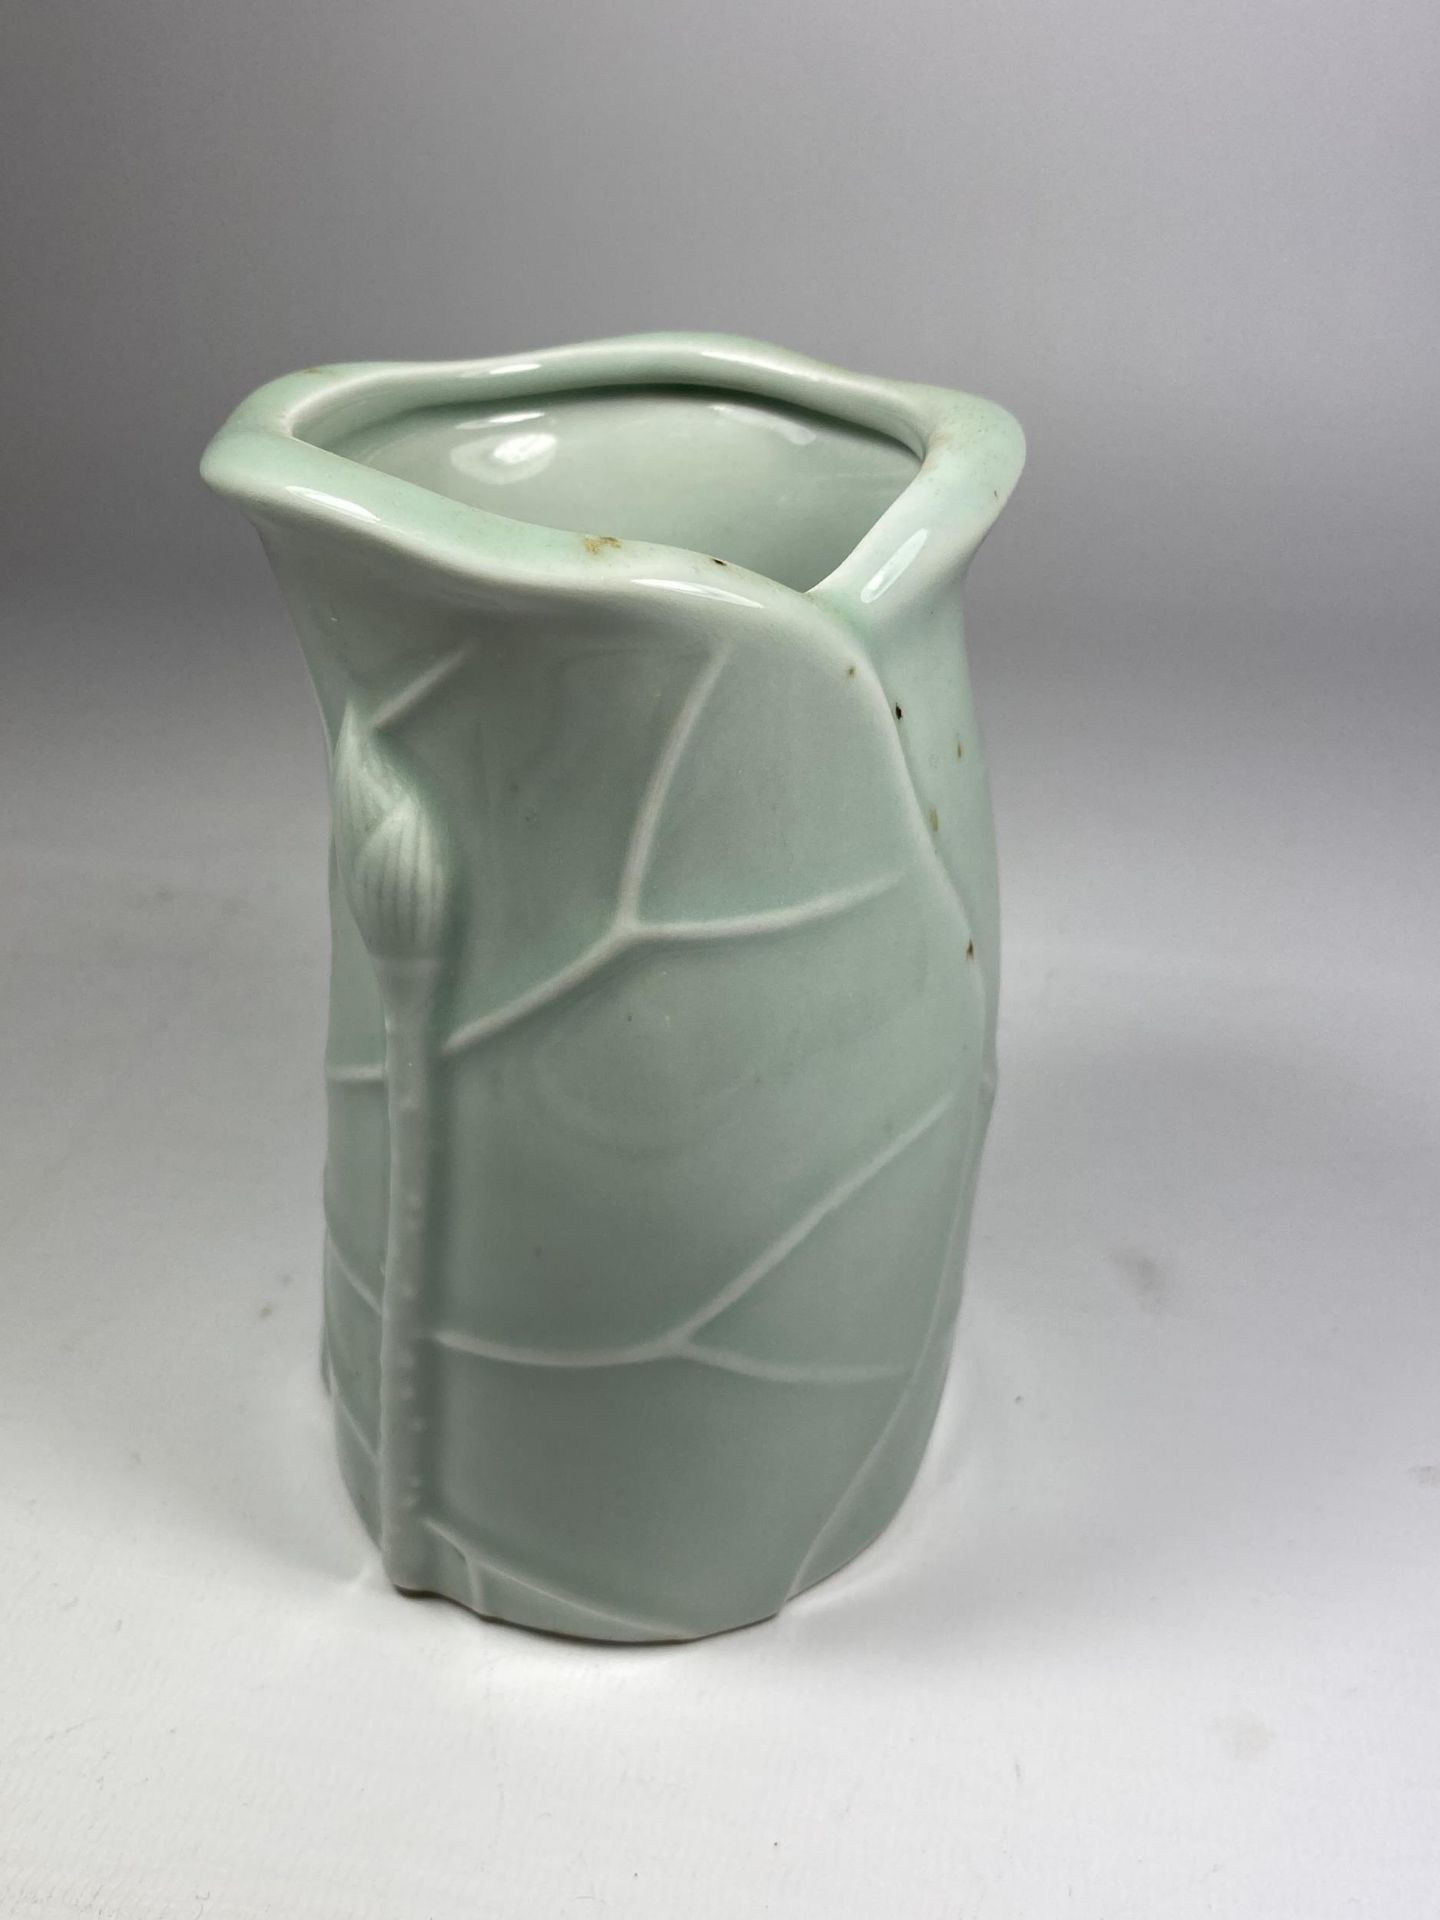 A CHINESE CELADON PORCELAIN VASE WITH STEM DESIGN, UNMARKED TO BASE, HEIGHT 12.5CM - Image 2 of 4